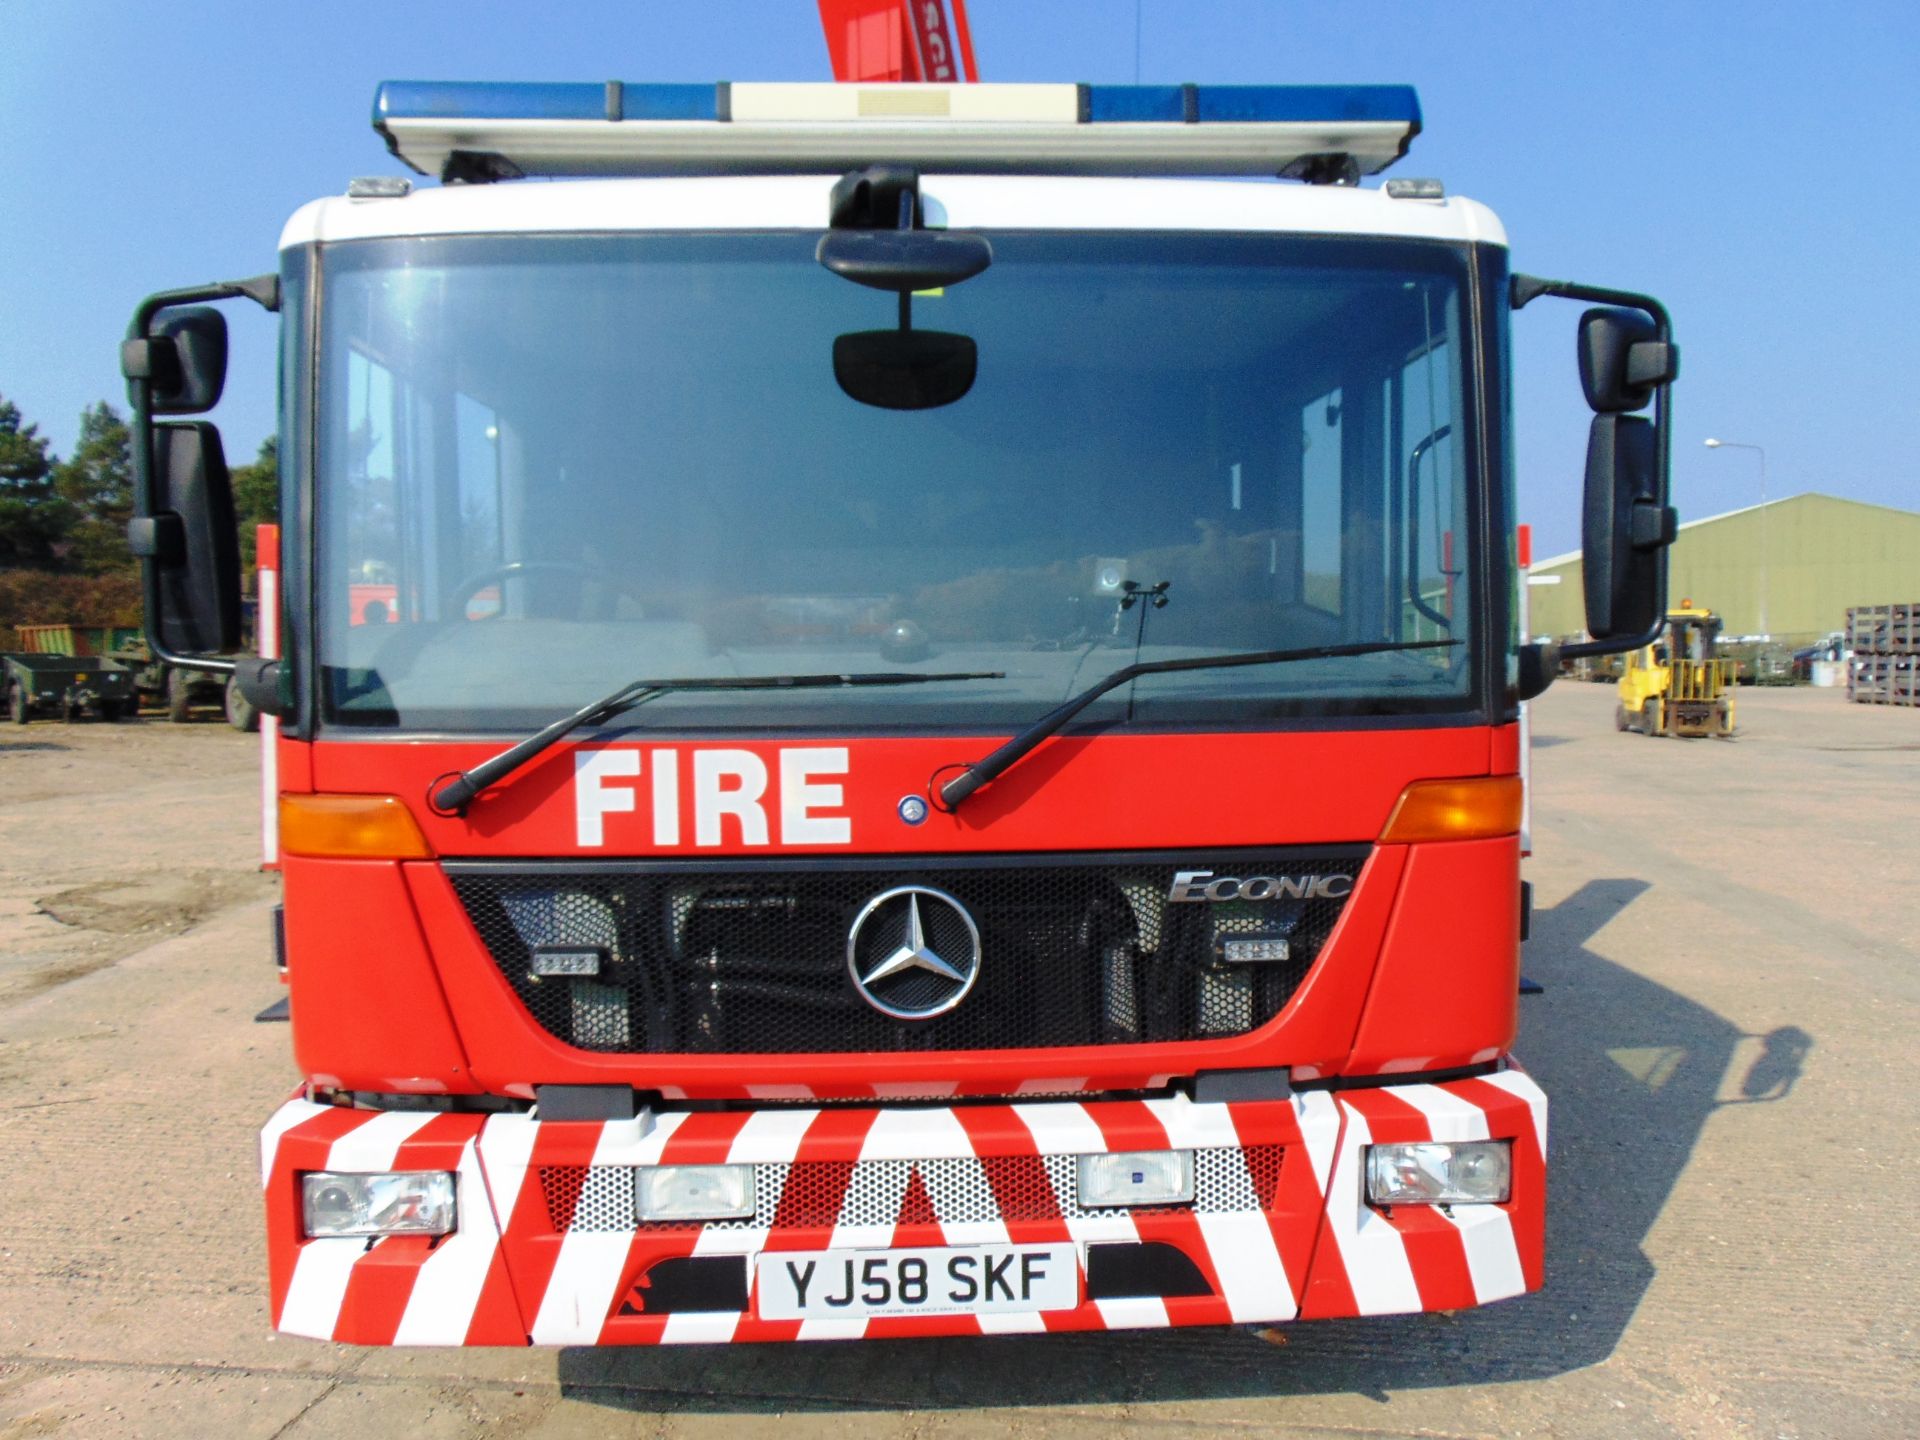 2008 Mercedes Econic CARP (Combined Aerial Rescue Pump) 6x2 Aerial Work Platform / Fire Appliance - Image 22 of 49